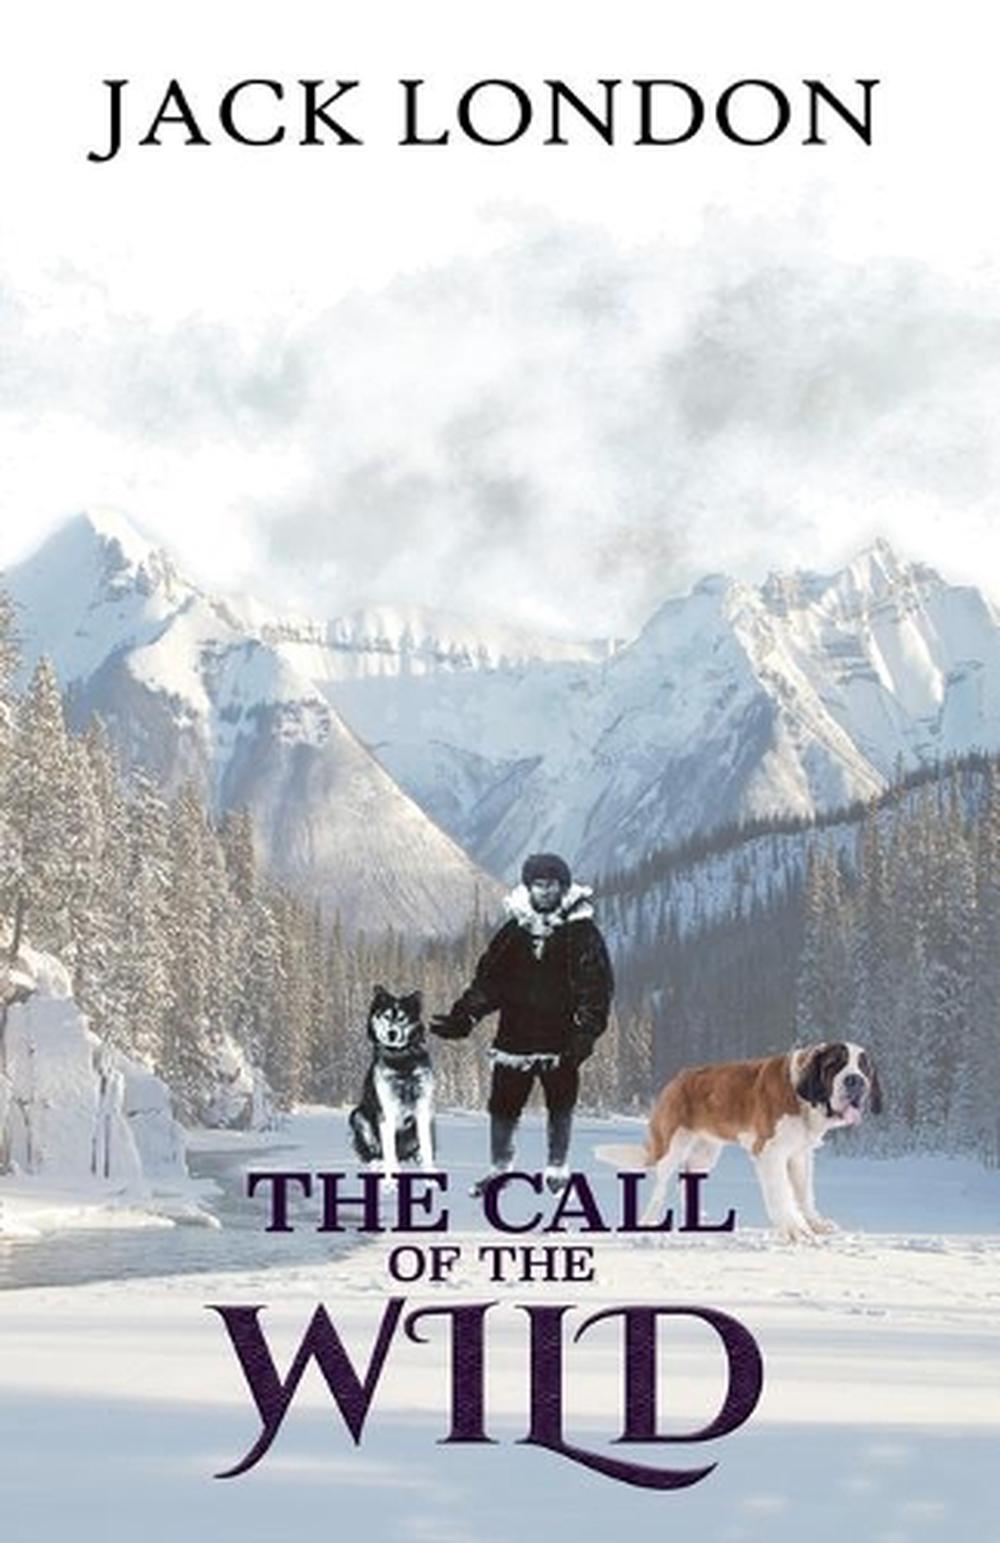 book review on call of the wild